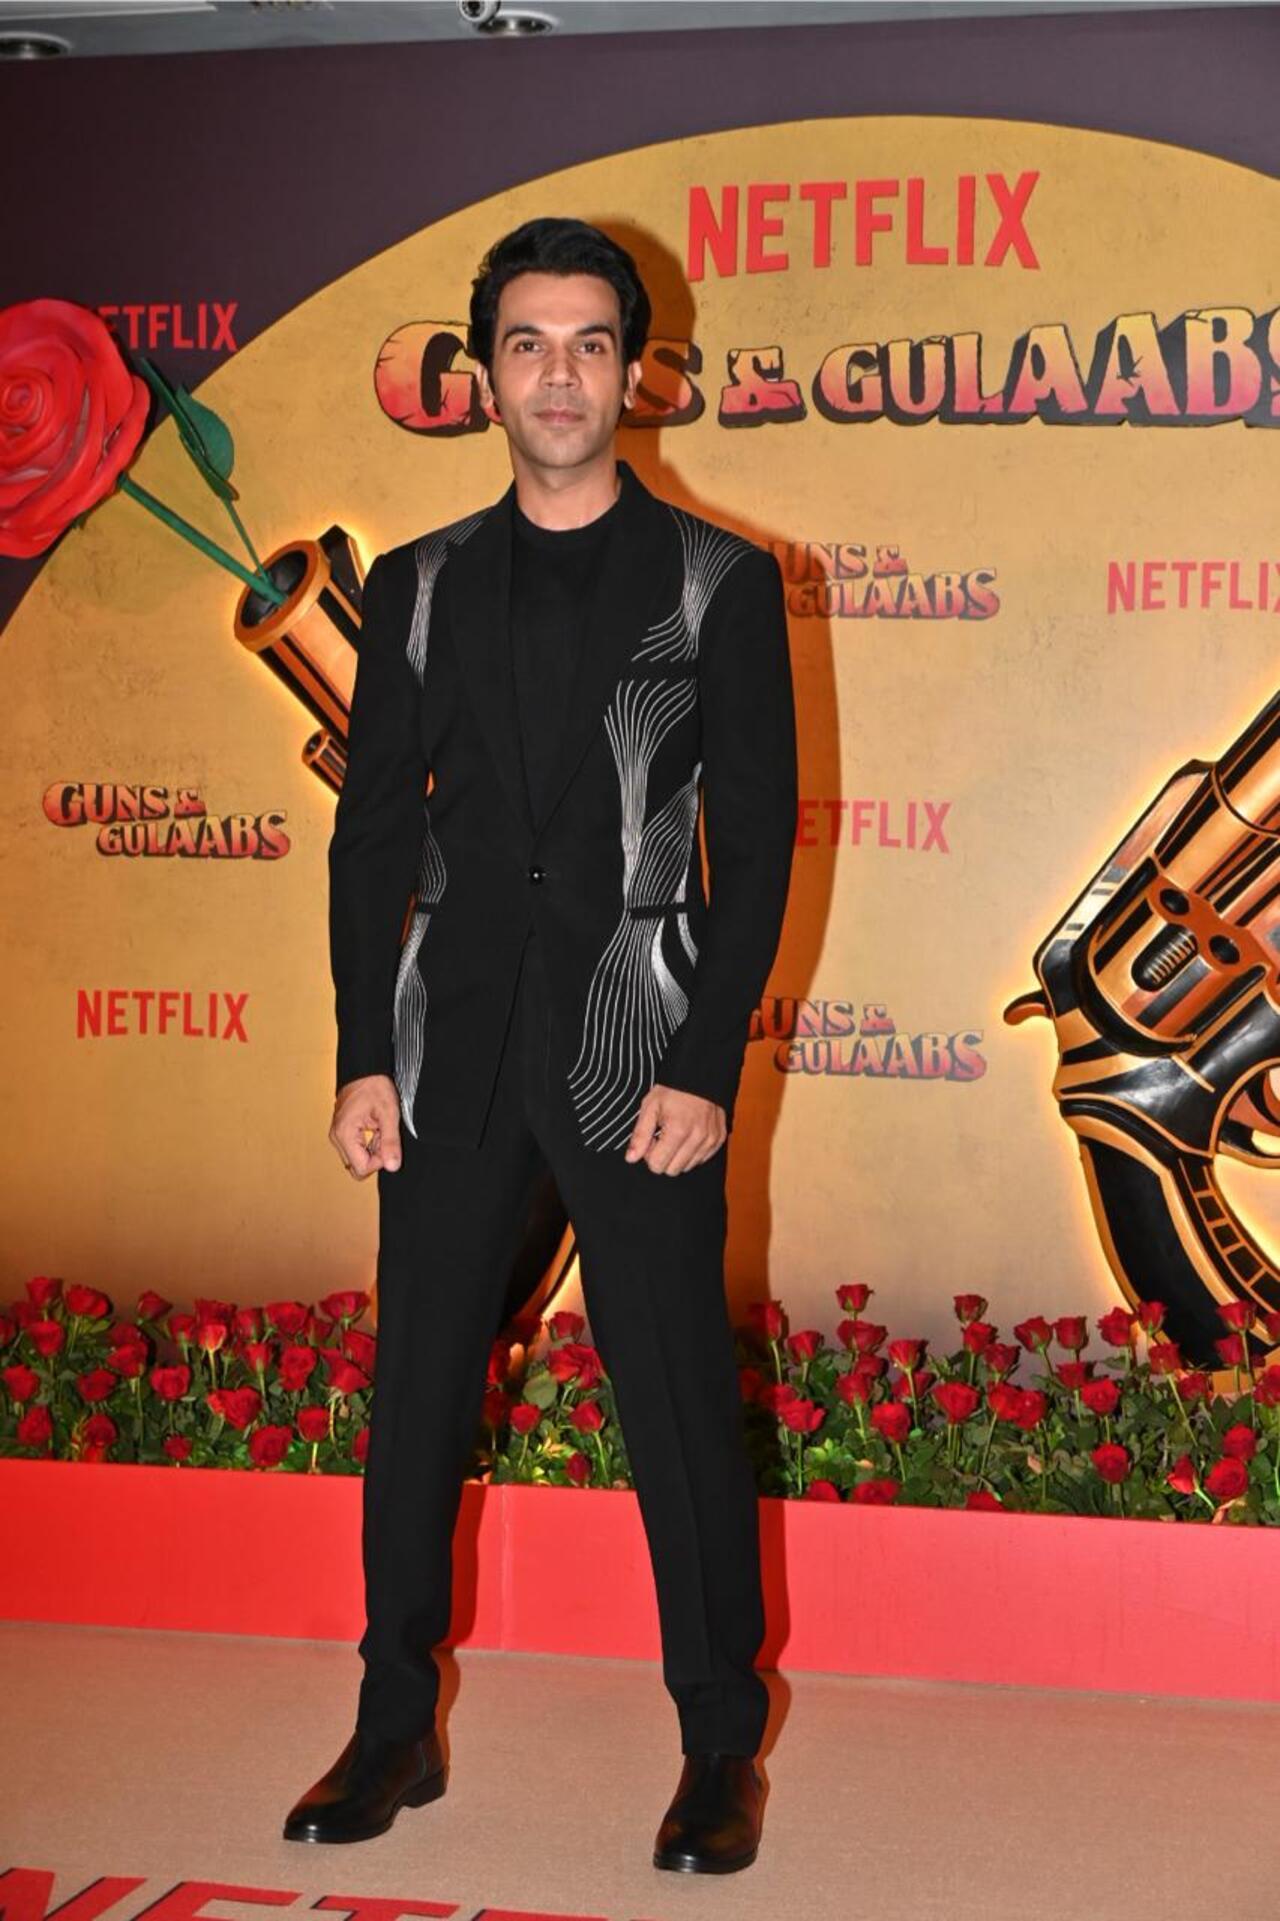 Rajkummar Rao opted for an all-black look for the screening. He plays the role of Panna Tipu in the series